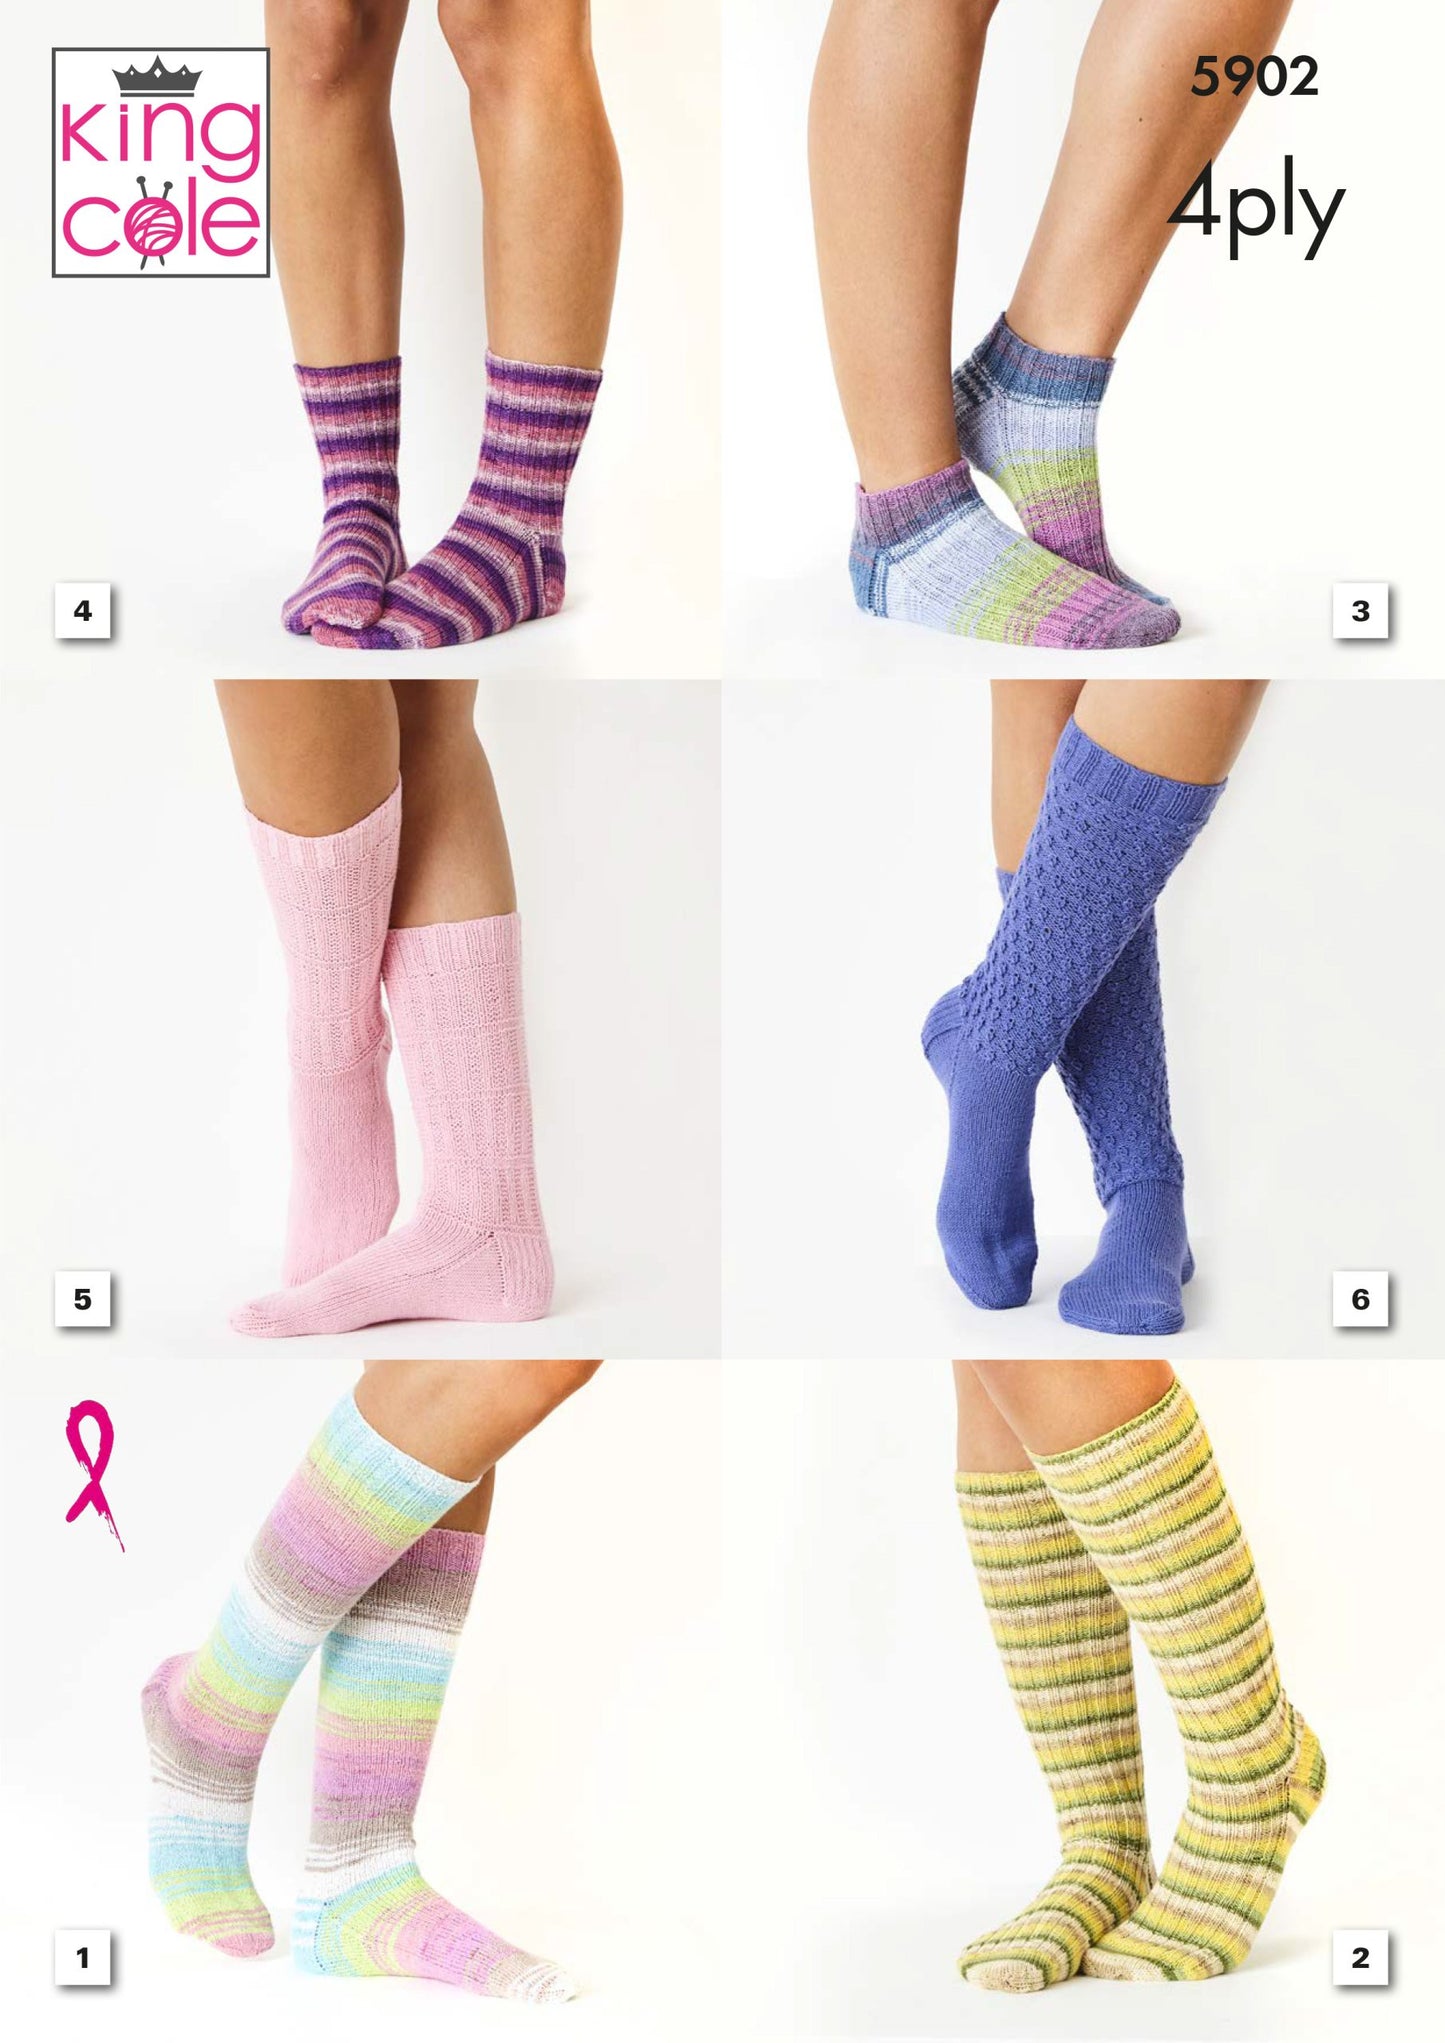 Knitting Pattern 5902 - Socks Knitted in Cotton Socks 4Ply, Footsie 4Ply, and Summer 4Ply